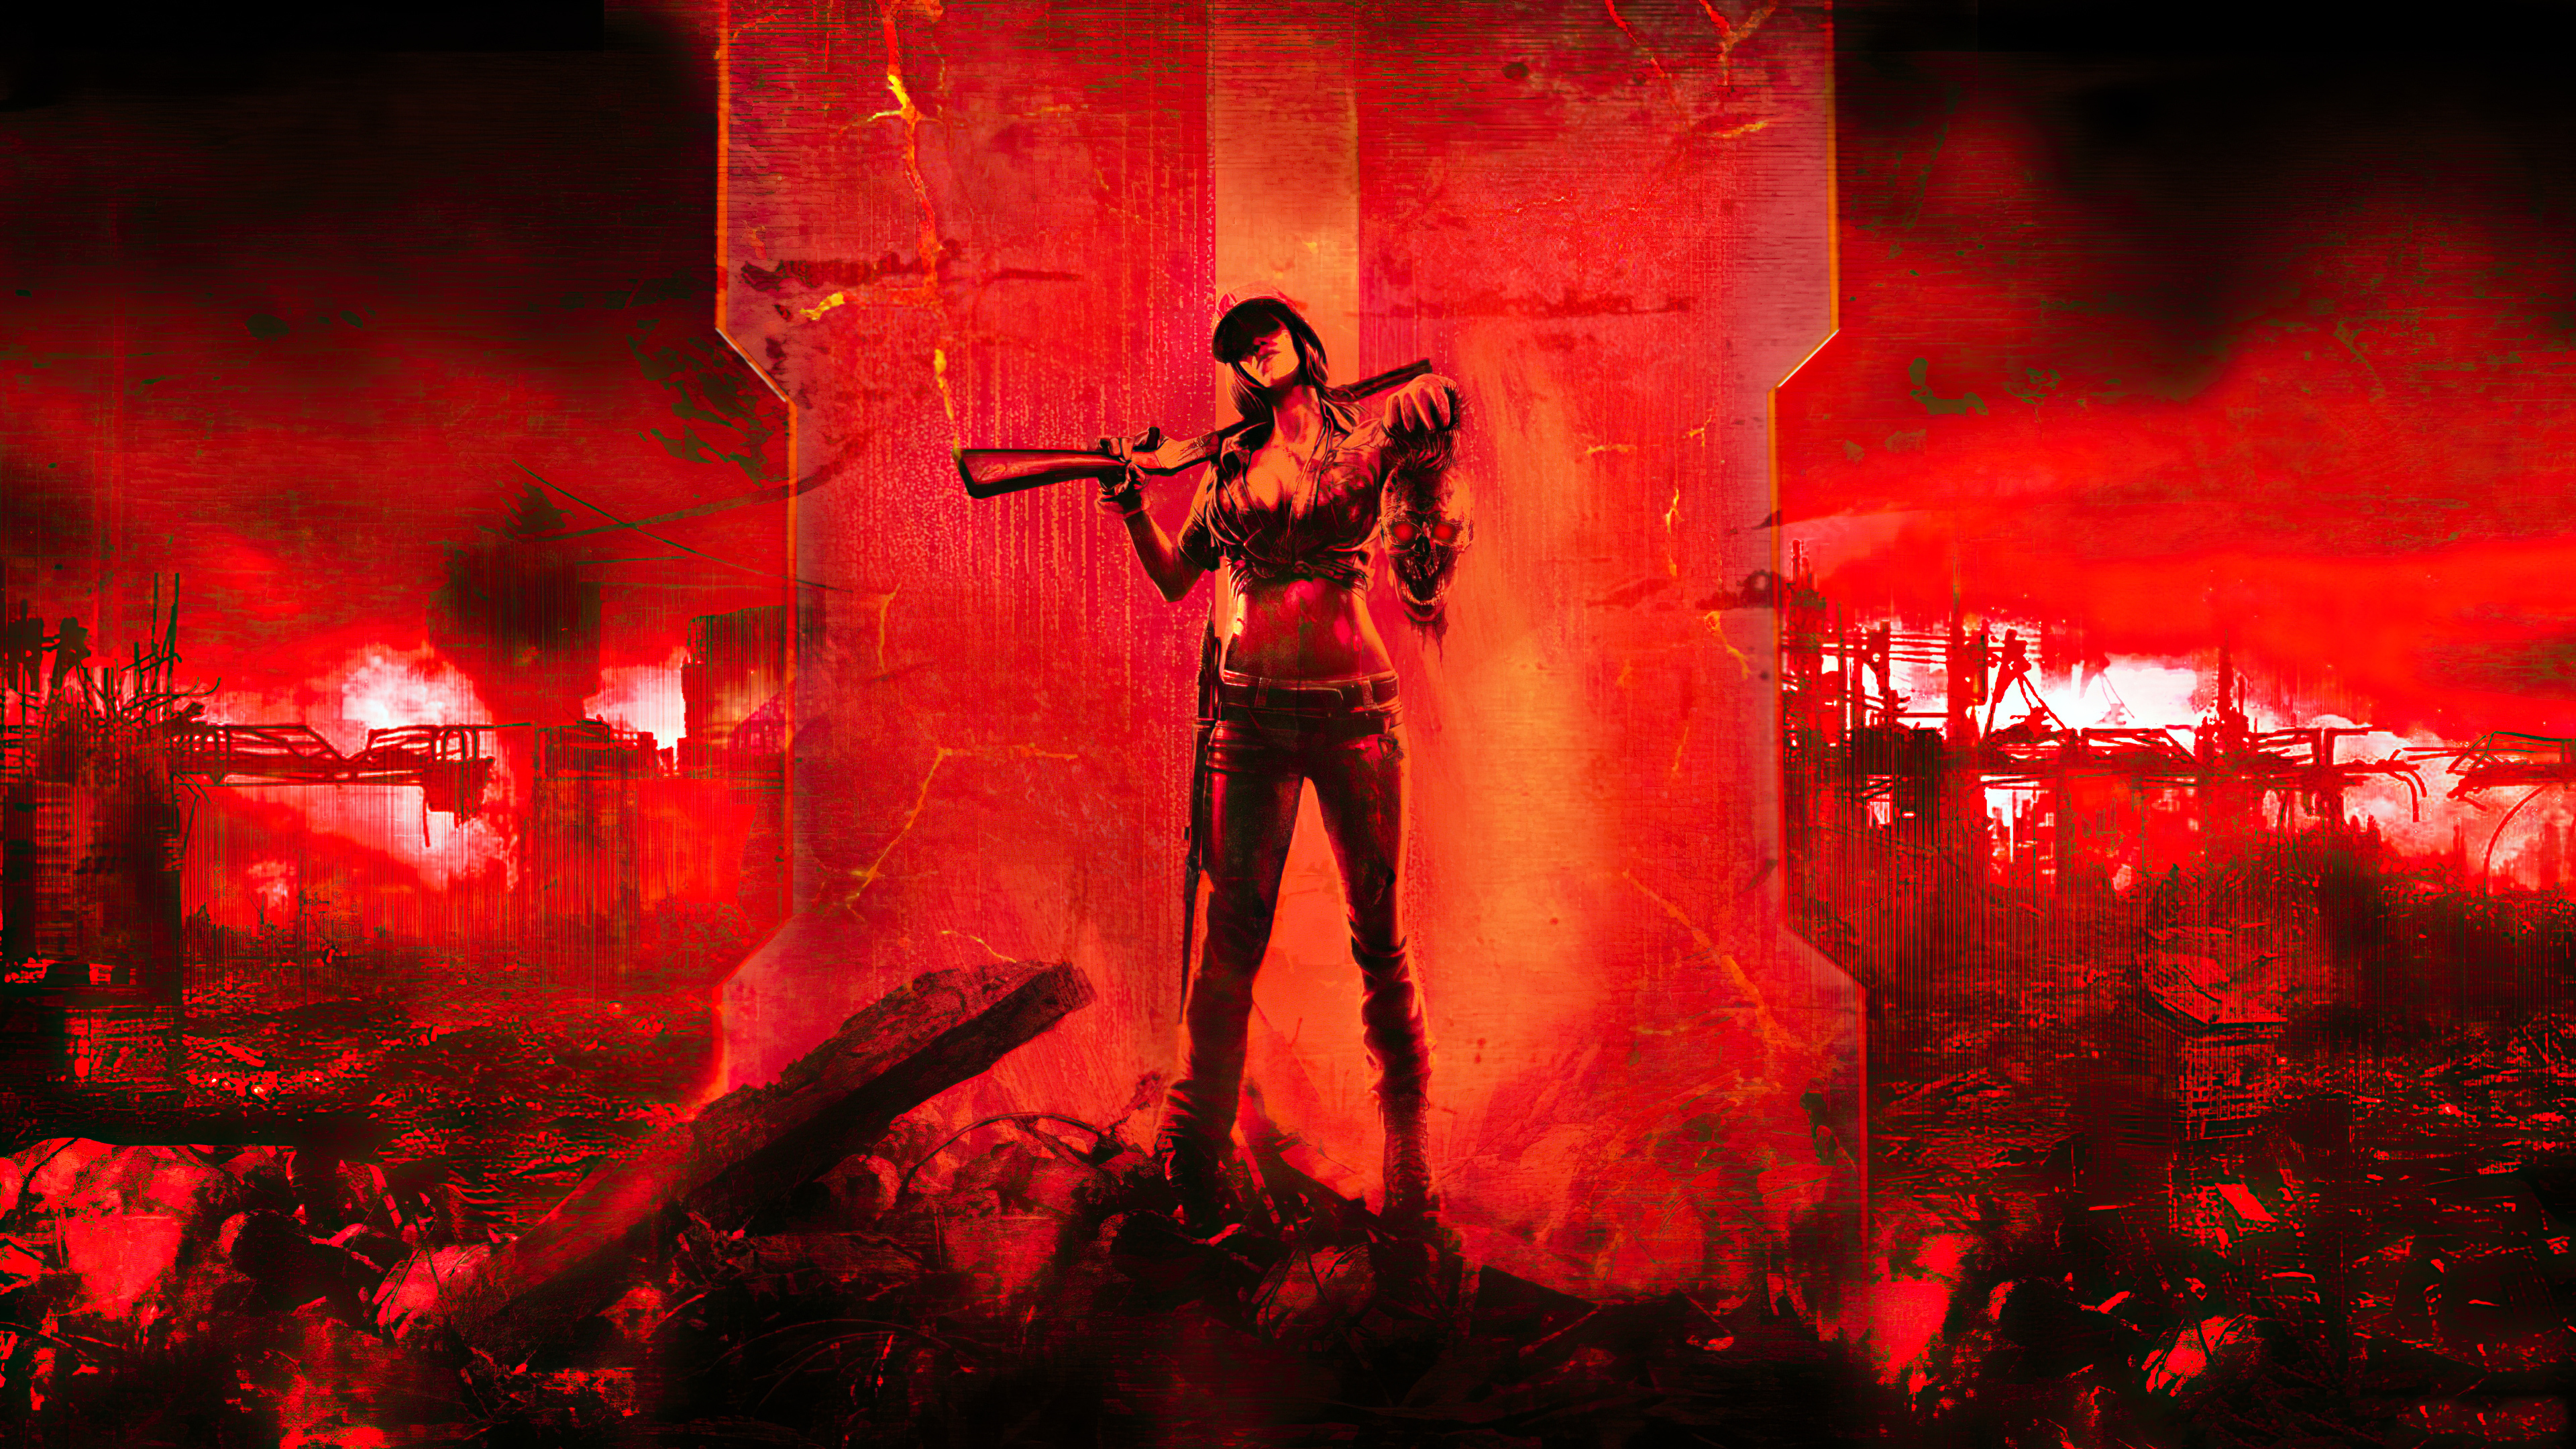 Download 3840x2160 wallpaper call of duty: black ops ii, girl character with gun, red, 4k, uhd 16: widescreen, 3840x2160 HD image, background, 25024